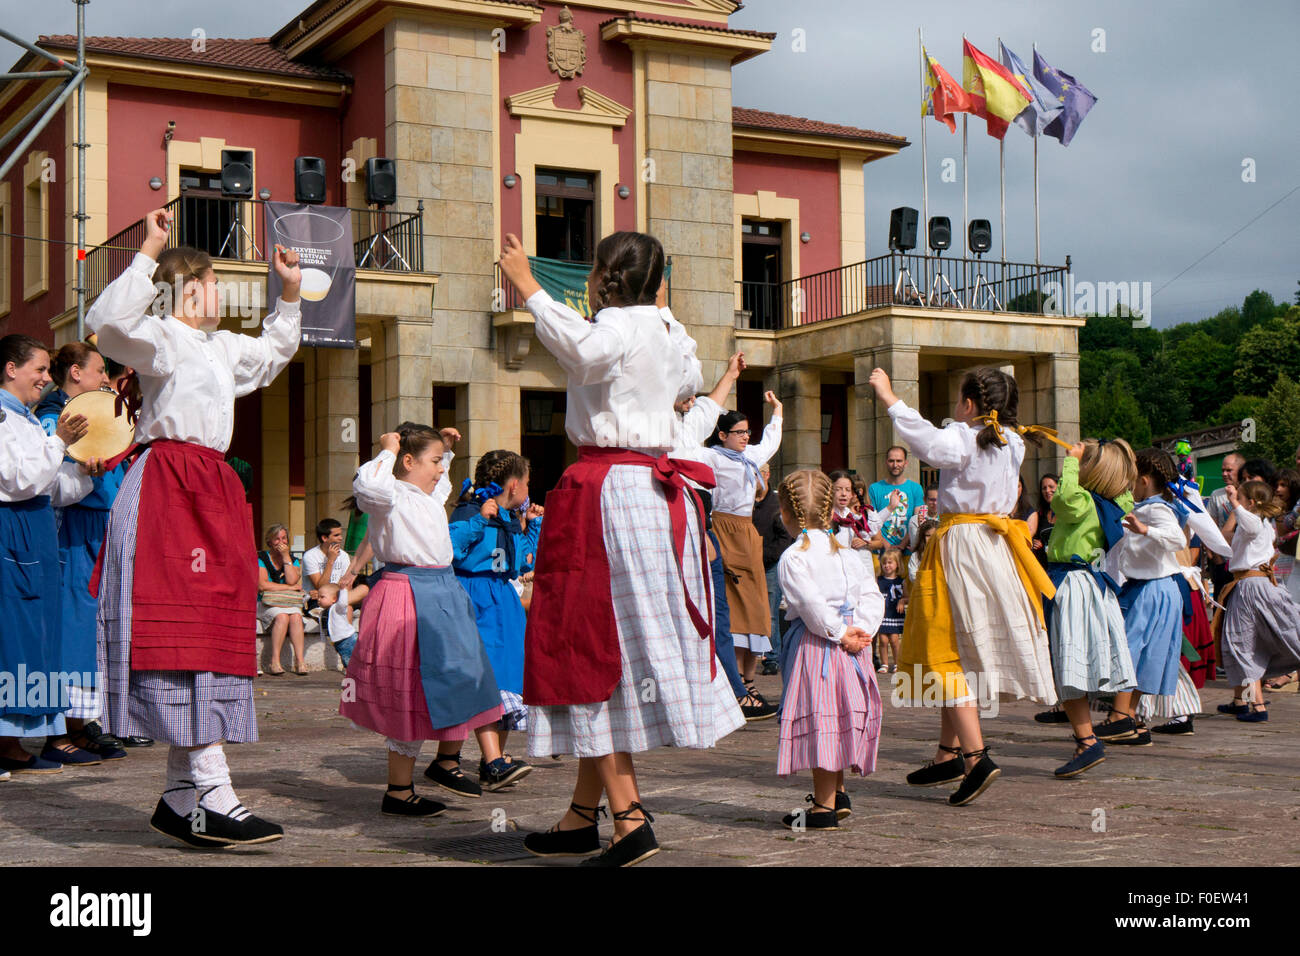 Traditional Costume and dancers at the Cidre Festival in Nava,Asturias,Northern Spain Stock Photo